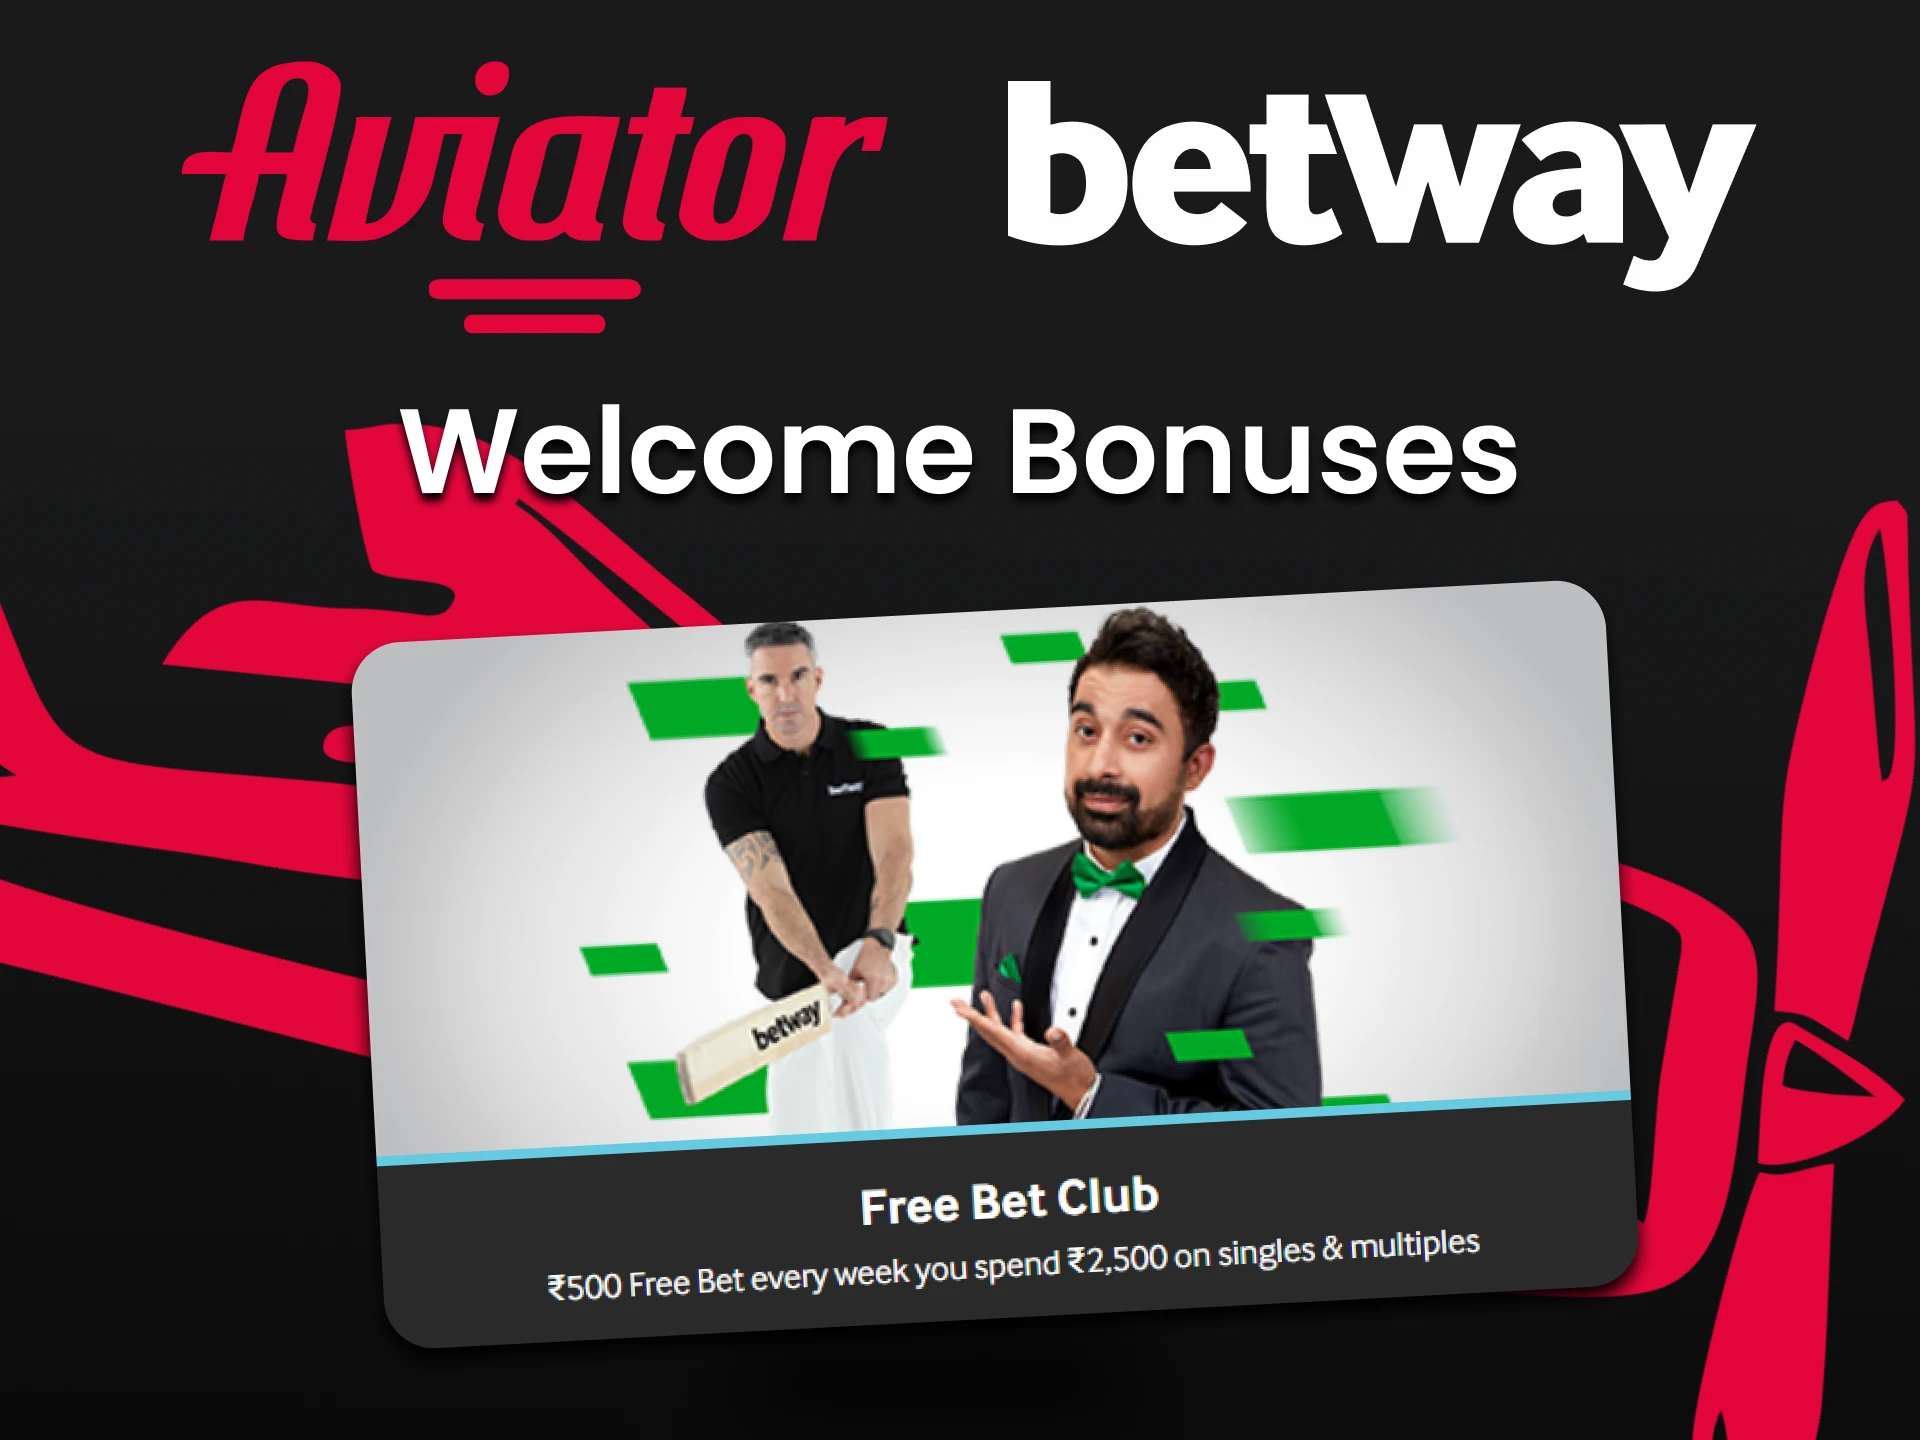 By choosing Betway to play Aviator you get bonuses.